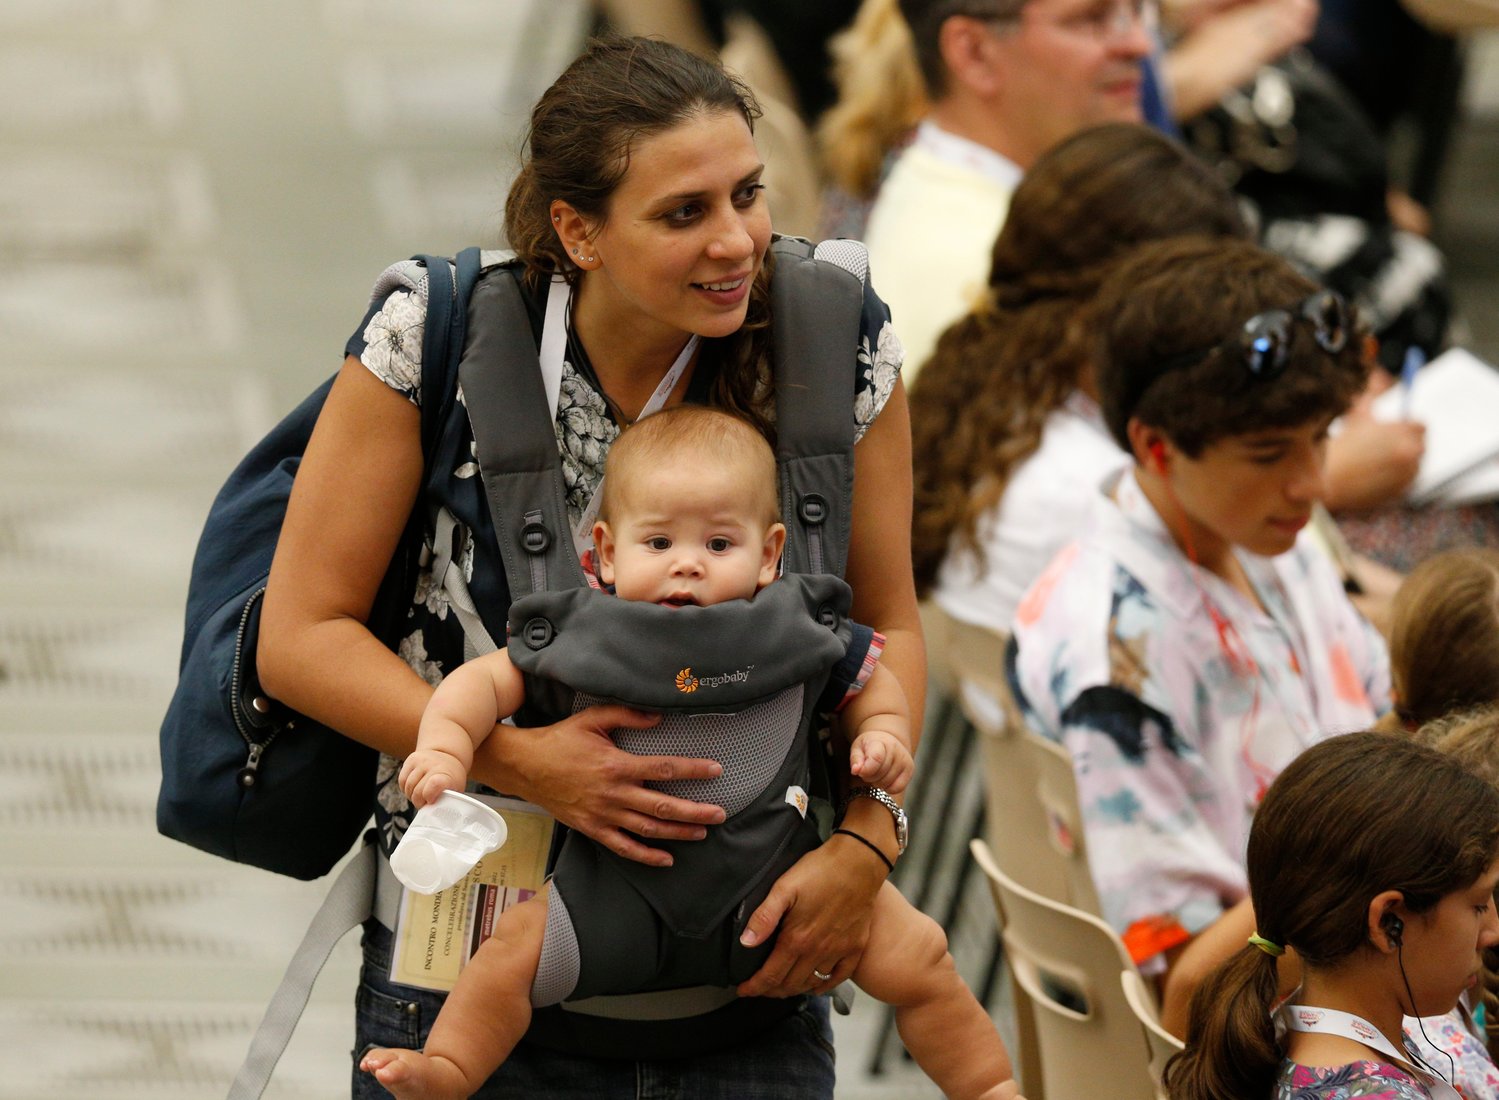 A woman carries a child during the World Meeting of Families in the Paul VI hall at the Vatican June 23.